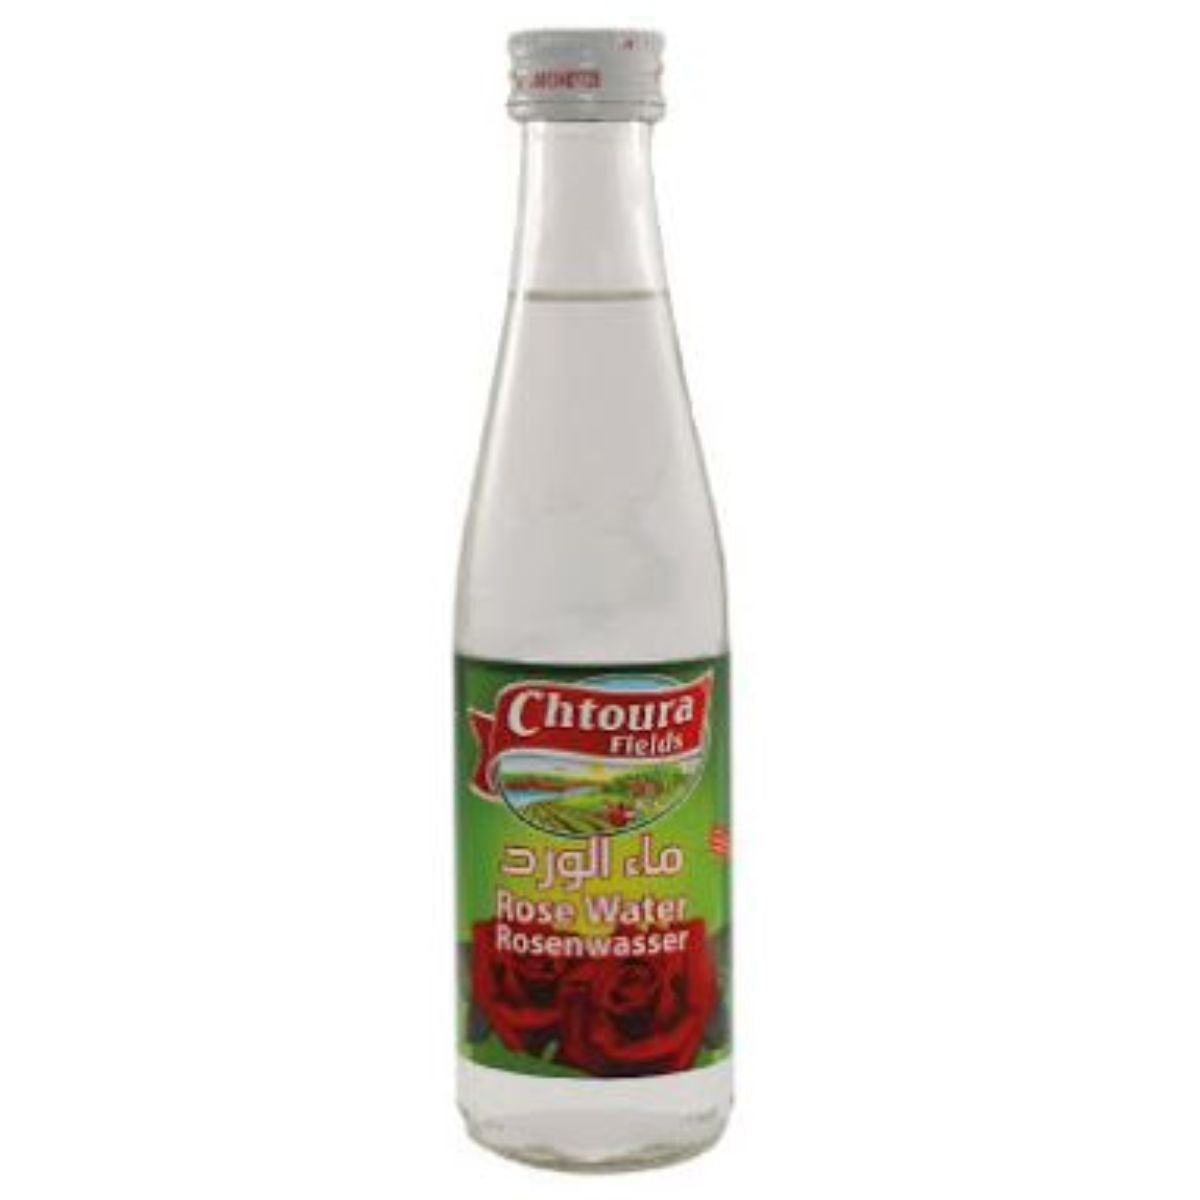 A bottle of Chtoura - Rose Water - 270ml with labels in multiple languages.